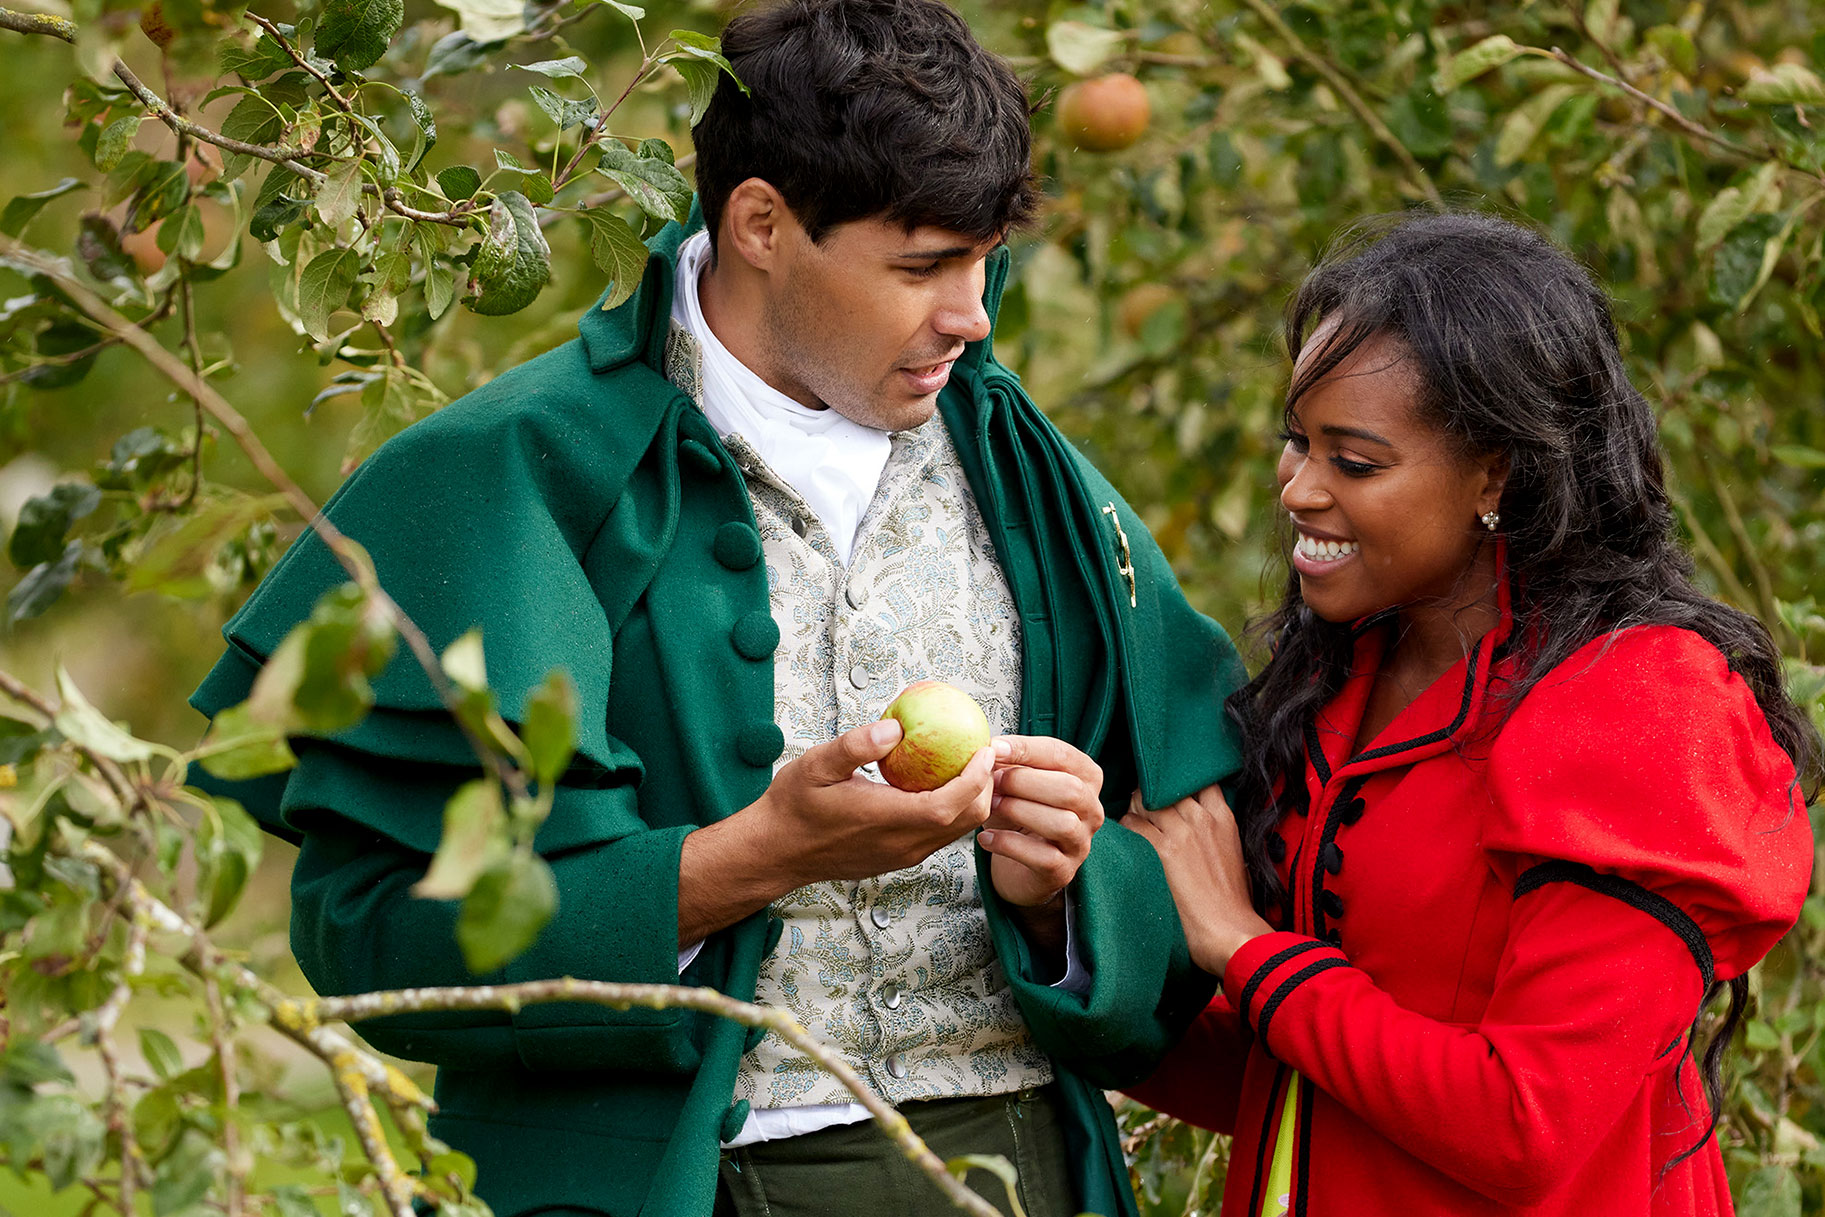 The Courtship's Nicole Remy Picking Apples With A Suitor